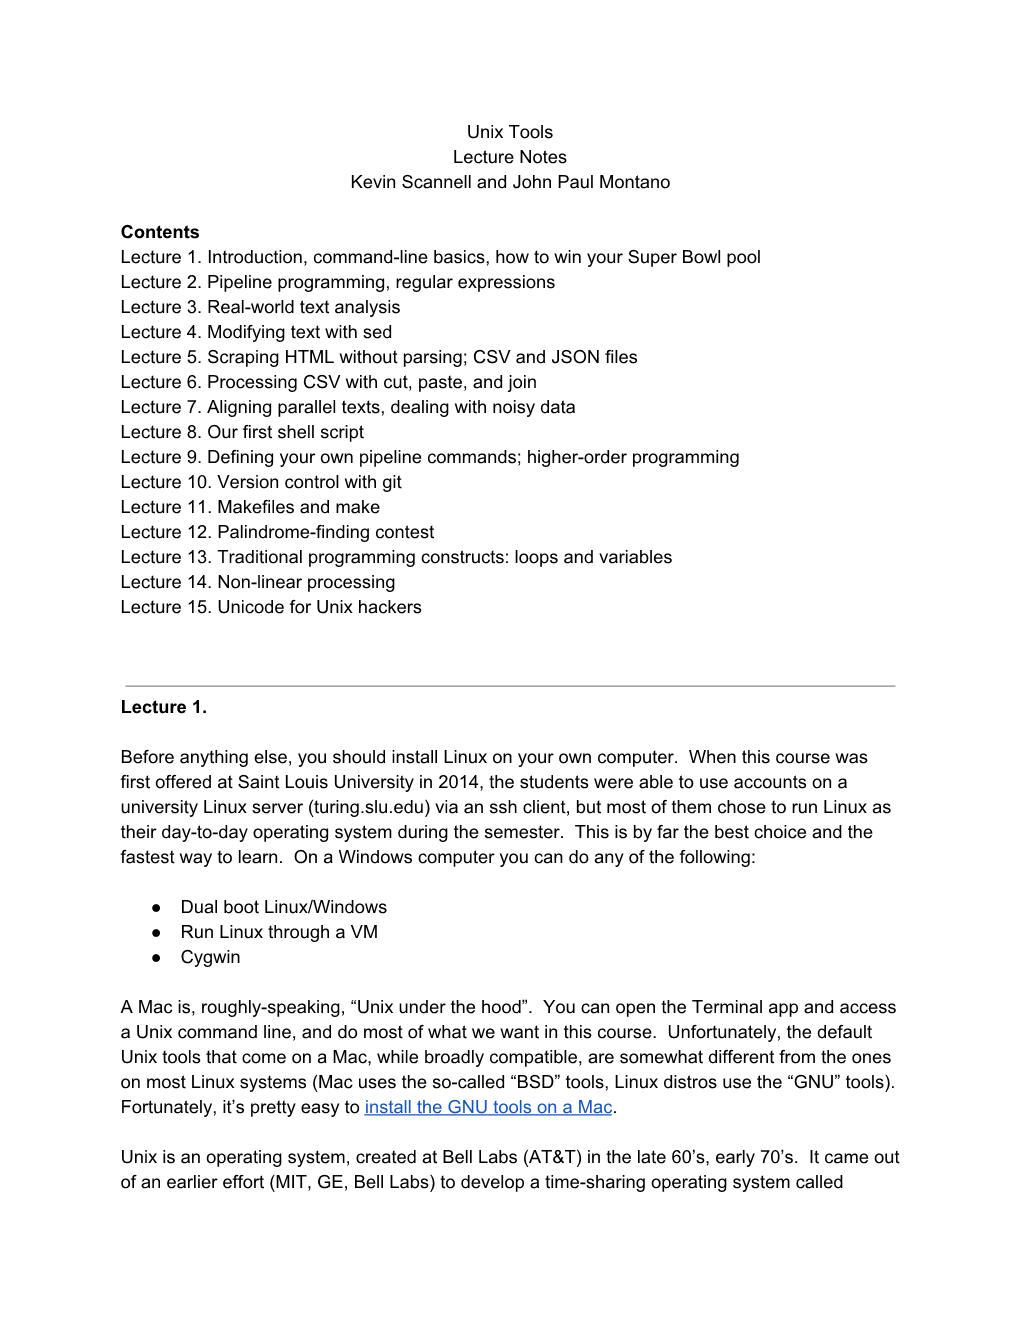 Unix Tools Lecture Notes Kevin Scannell and John Paul Montano